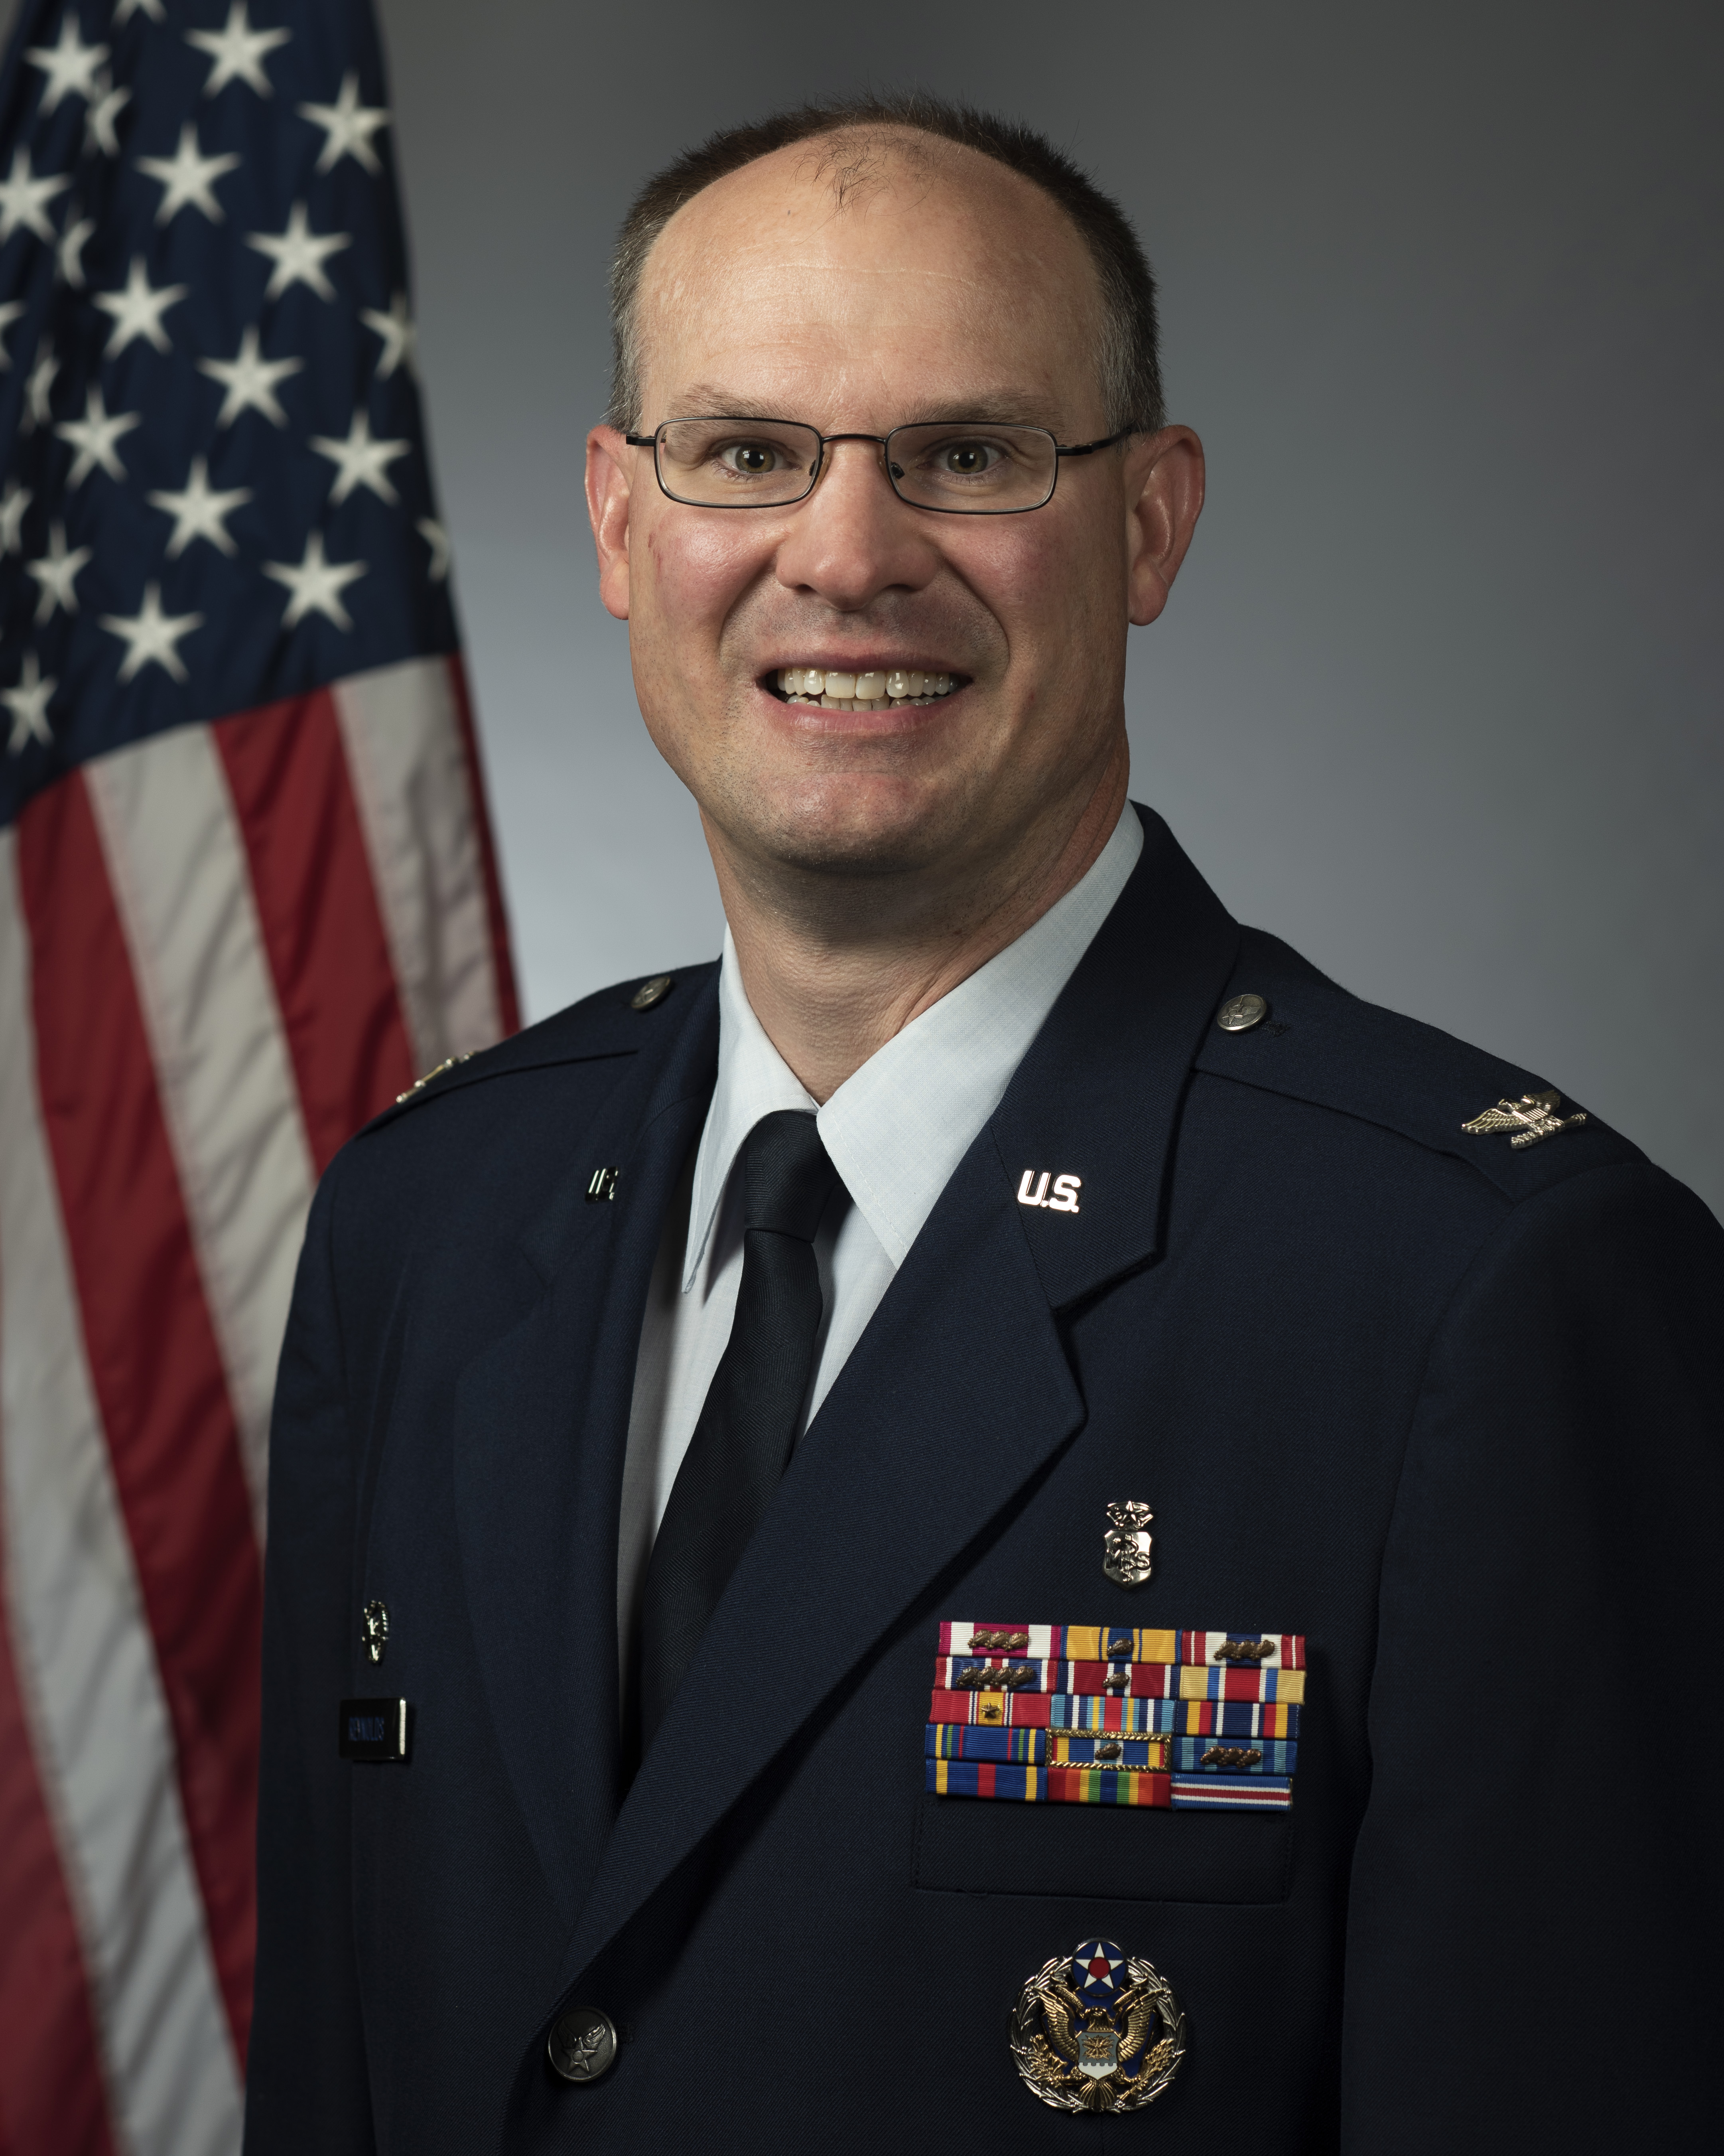 Official Photo of 509th Medical Group Commander Col. Mark D. Reynolds